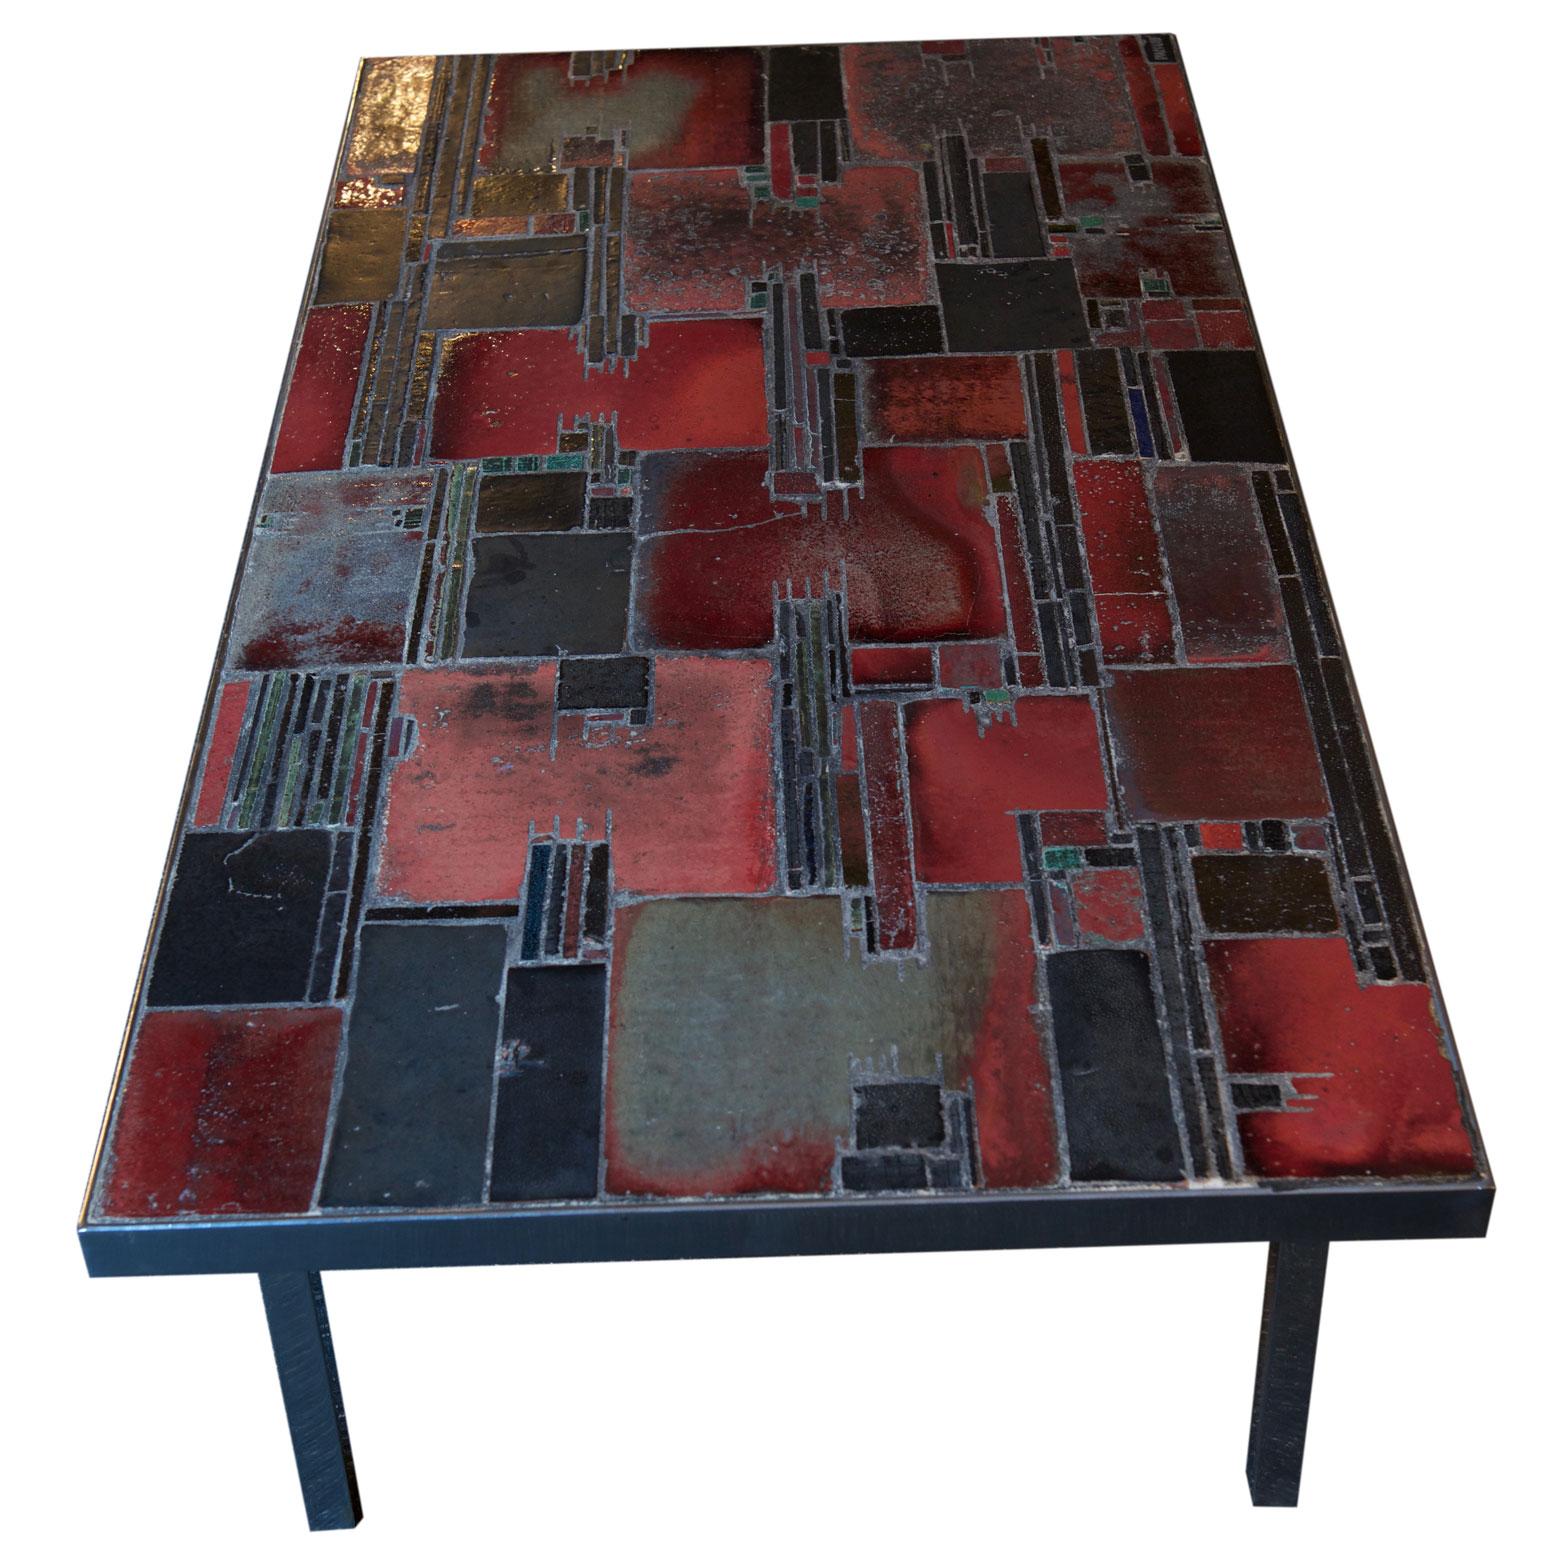 Rectangular coffee table by Pia Manu (signed on the top). The top is made of tiles of red glazed ceramic, slate and black Belgian marble.